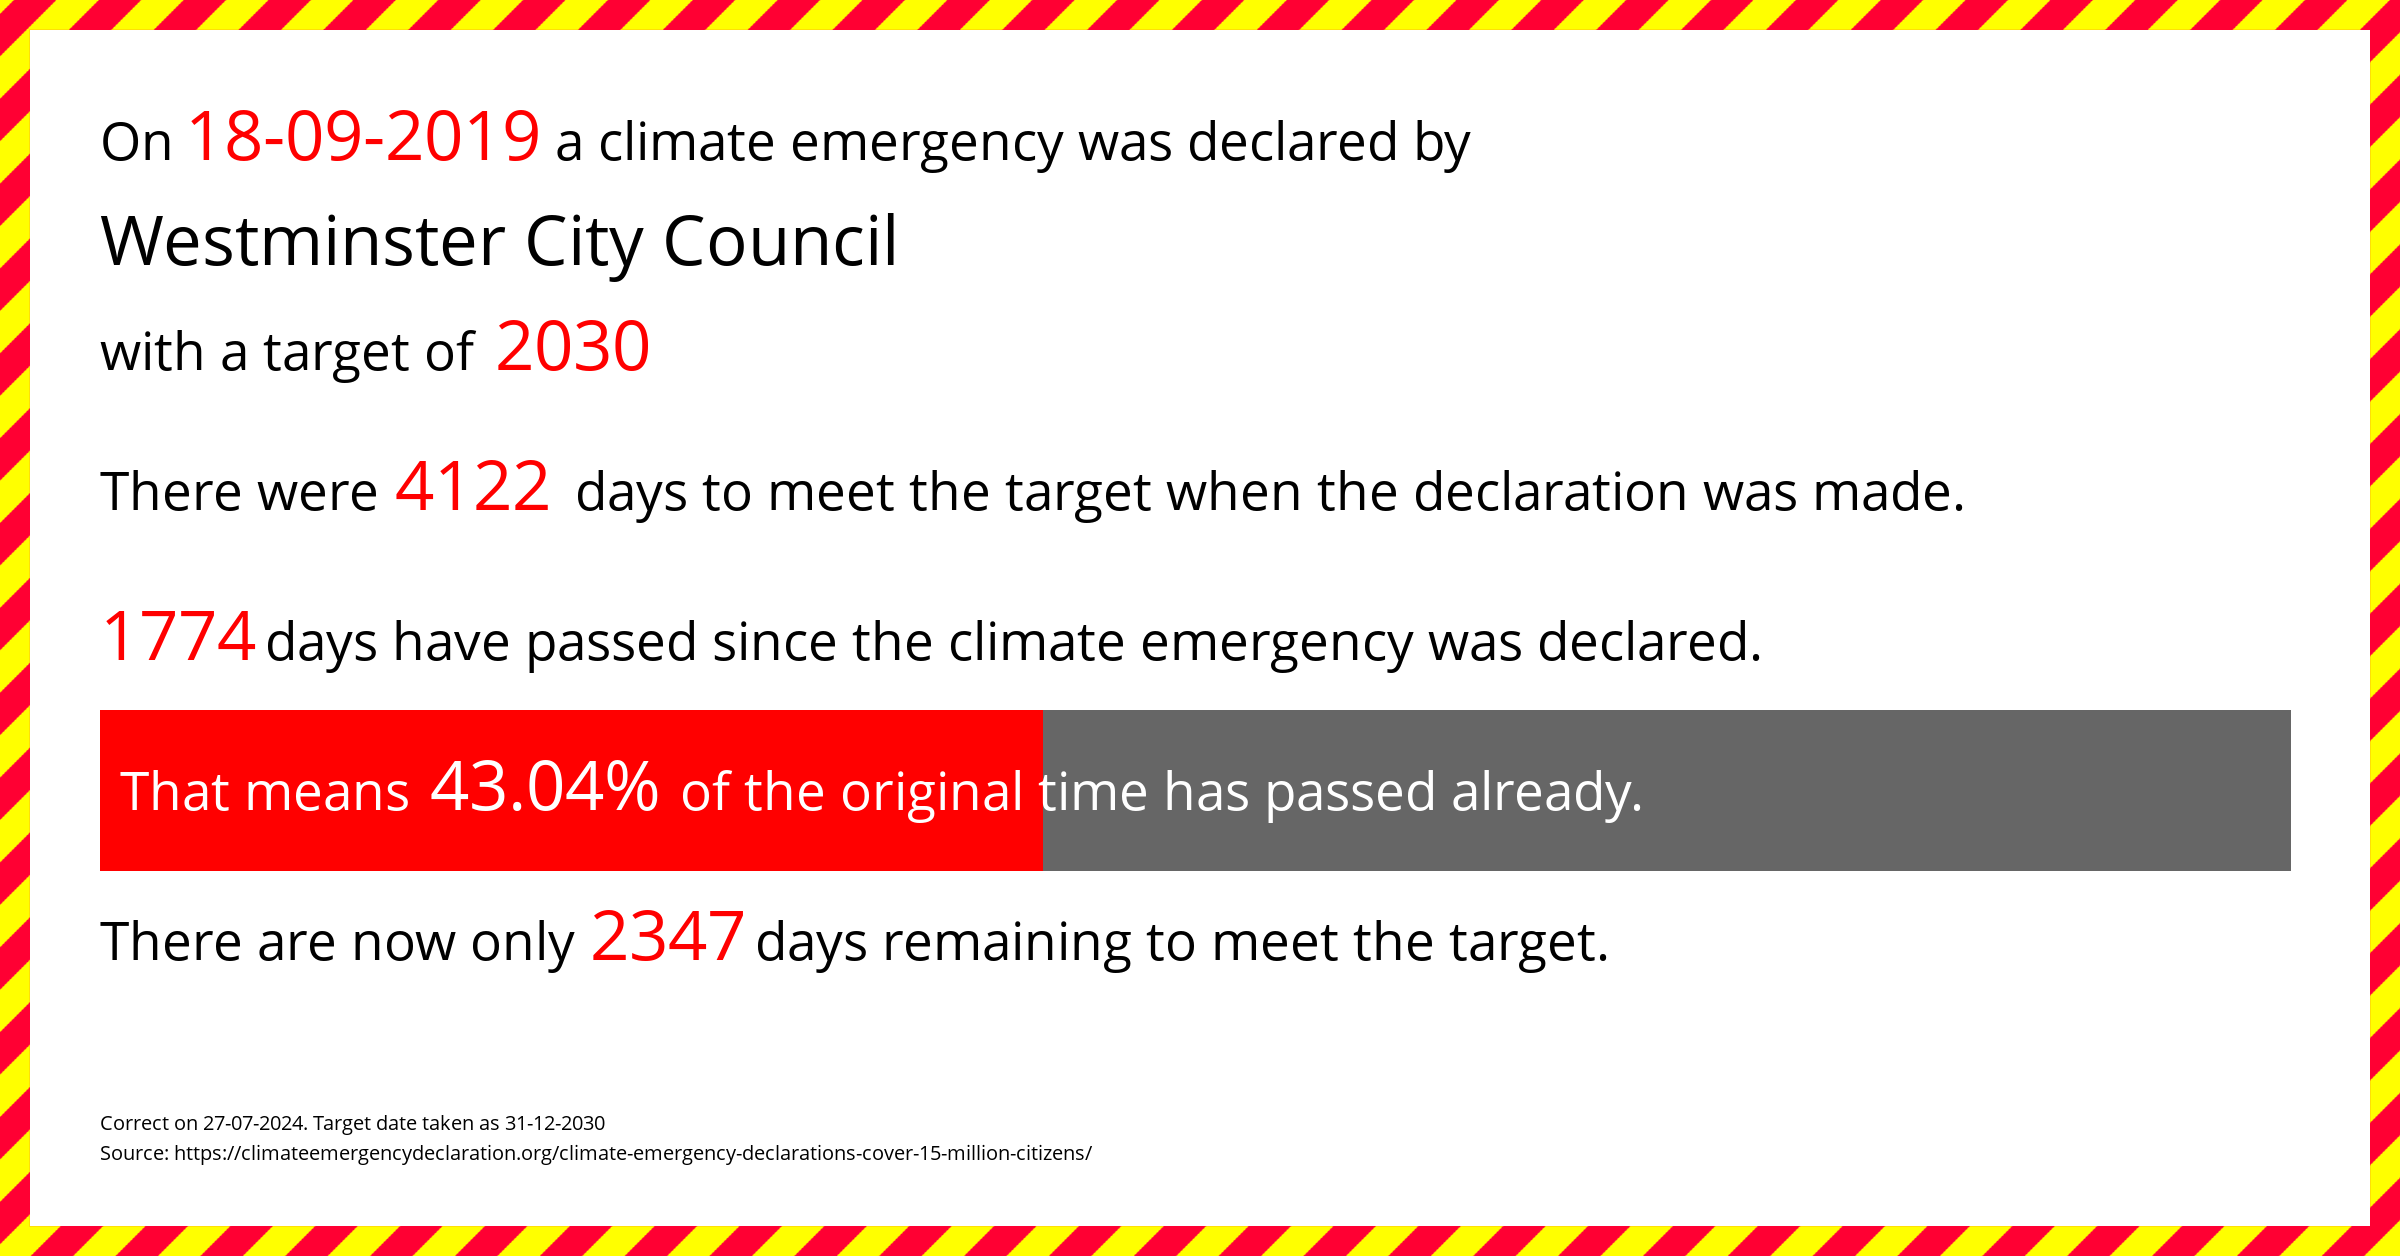 Westminster City Council declared a Climate emergency on Wednesday 18th September 2019, with a target of 2030.